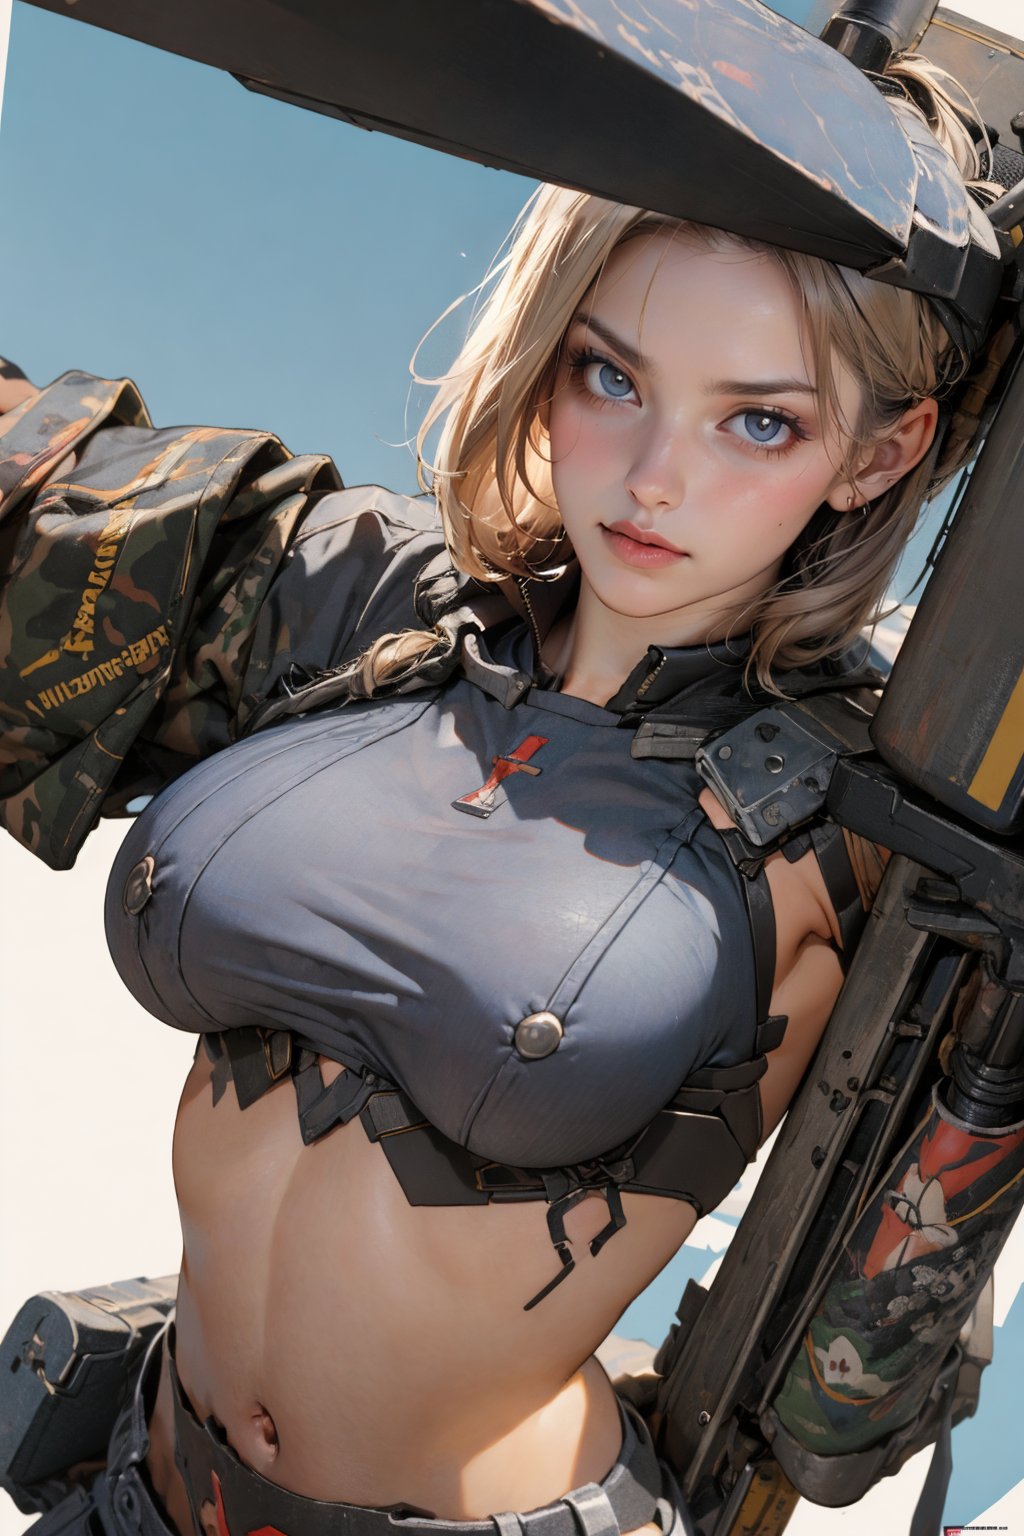 (masterpiece, best quality, hires, high resolution:1.2), (extremely detailed, realistic, high contrast, highres), 3d, cg, sexy_mature_woman, ((nsfw, breasts_out, Detailed_face)), (brutalist style:1.8), (((wearing military uniform, robot, cannon, mechinegun, tank, missile, Rocket launcher, SMAW, science fiction, Delta Force, Army_Equipment))), Military camouflage, muscular, abs, shiny_skin, light_skin, perfect_hands, (cinematic lighting, sunlight, volumetric), looking at viewer, eye-level shot, (close_up:1.3), simple Indigo background, vintage fantasy, 1960s \(style\), film grain, (atompunkstylesd15:1.0), (soviet poster:1.4), ruanyi0214, ruanyi0220, wearing heavy gear, weapon on shoulder, (dynamic pose:1.4), female action poses, Military,ruanyi0402